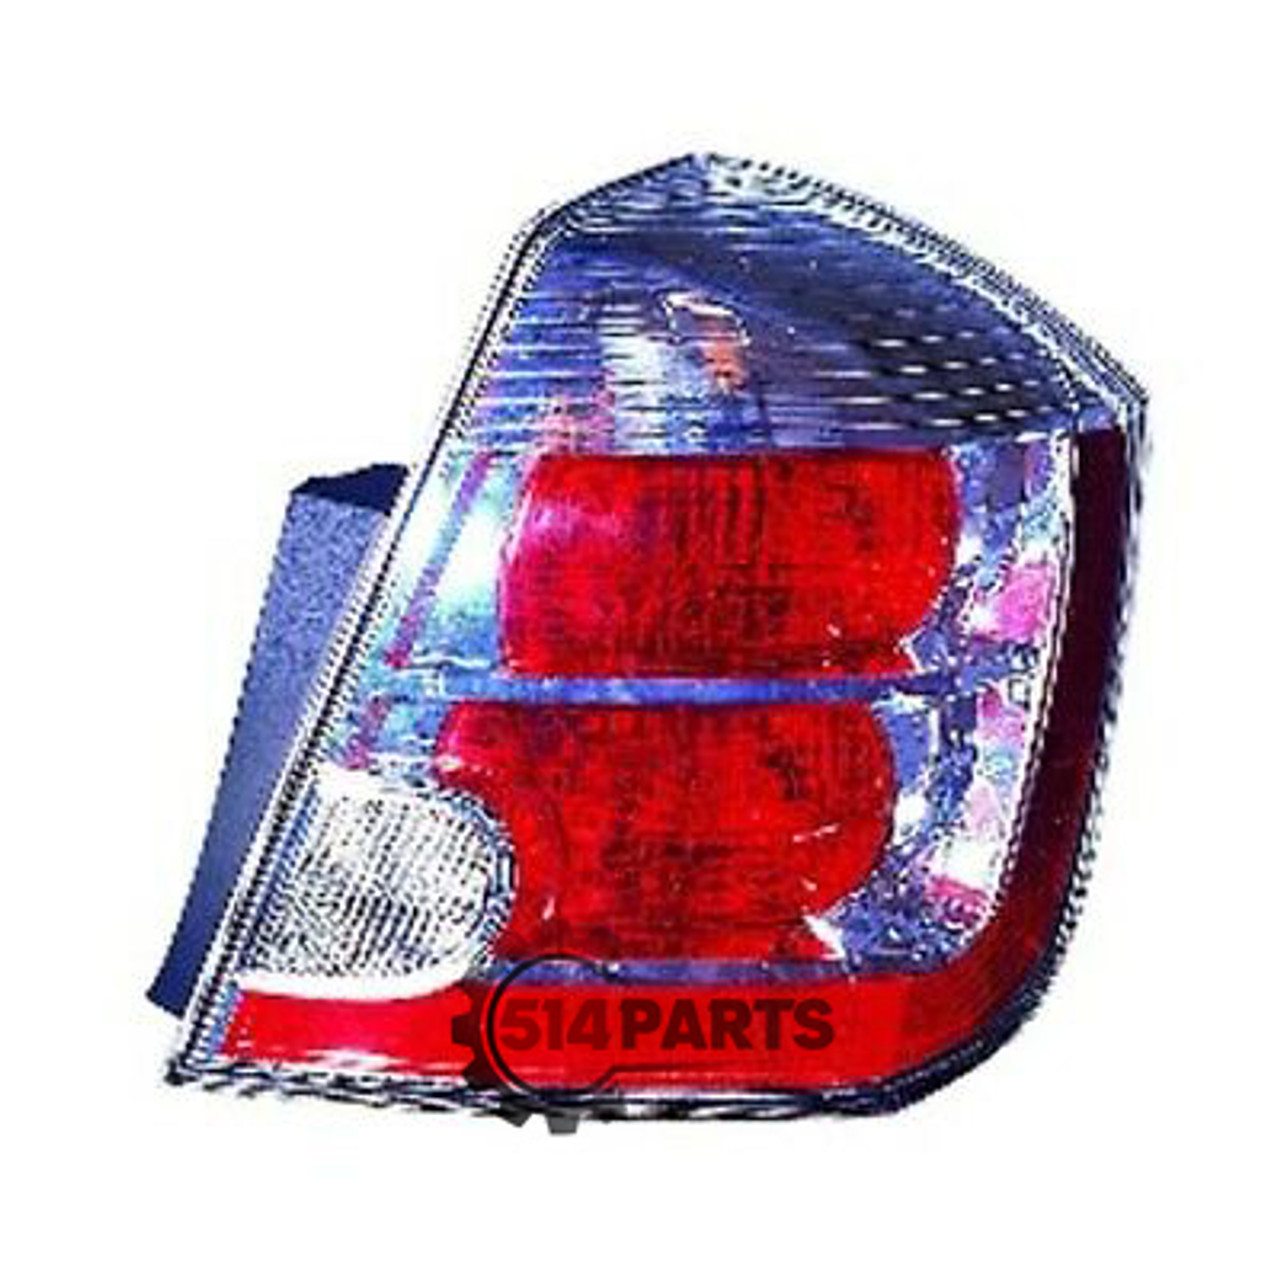 2007 - 2009 NISSAN SENTRA 2.0L TAIL LIGHTS High Quality - PHARES ARRIERE Haute Qualite